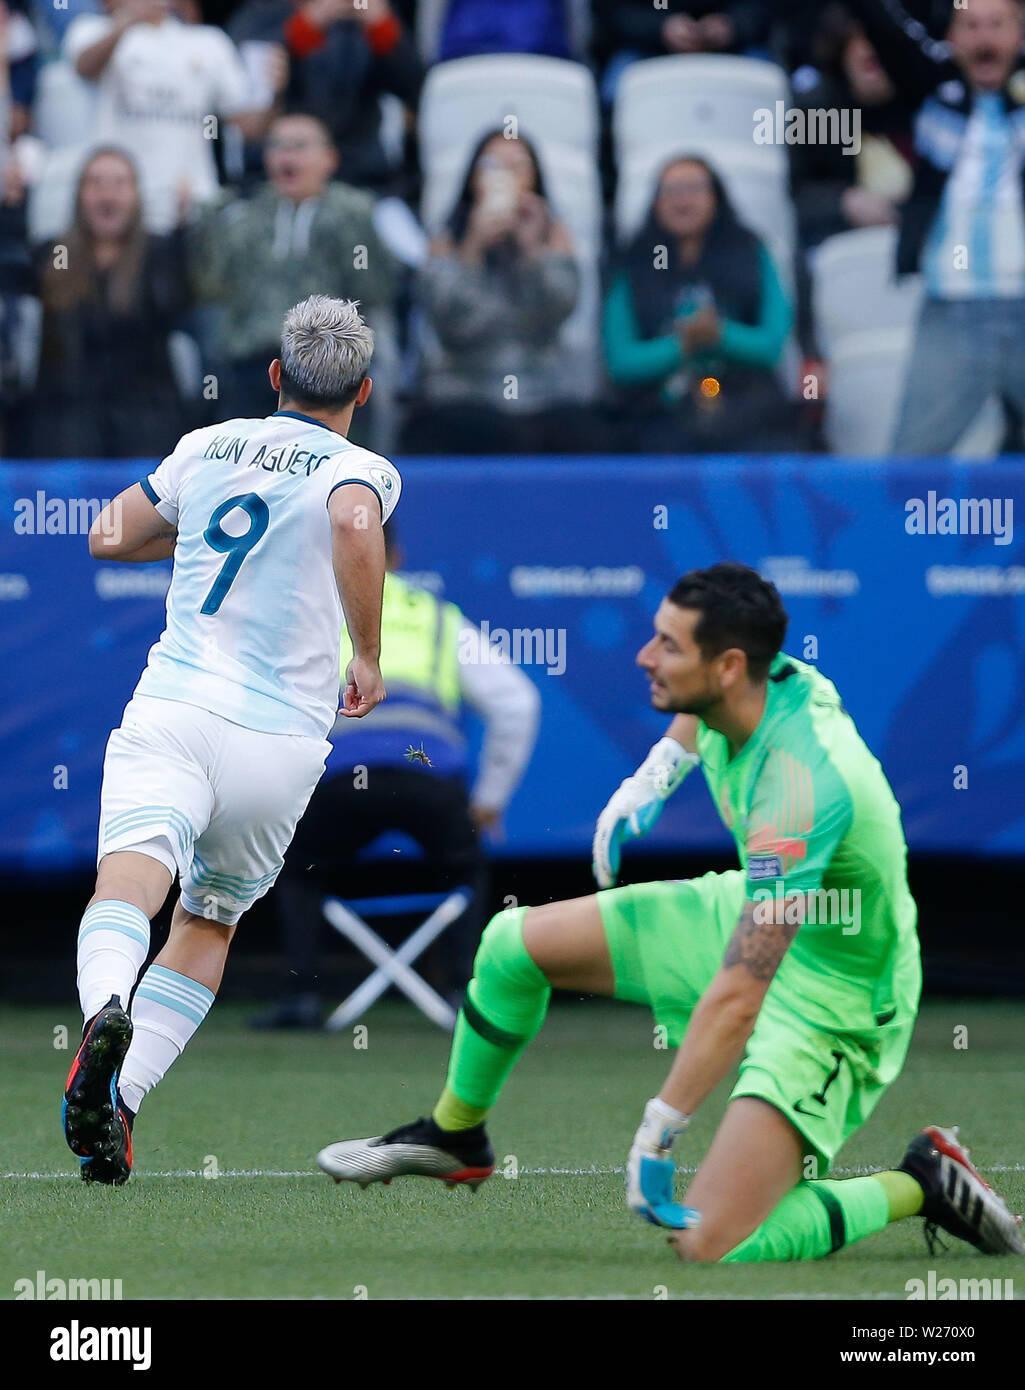 SÃO PAULO, SP - 06.07.2019: ARGENTINA VS. CHILE - Argentina's Sergio Kun Aguero celebrates after scoring a goal during a match between Argentina and Chile, valid for the third place match of the Copa América 2019, held this Saturday (06) at the Corinthians Arena in São Paulo, SP. (Photo: Marcelo Machado de Melo/Fotoarena) Stock Photo